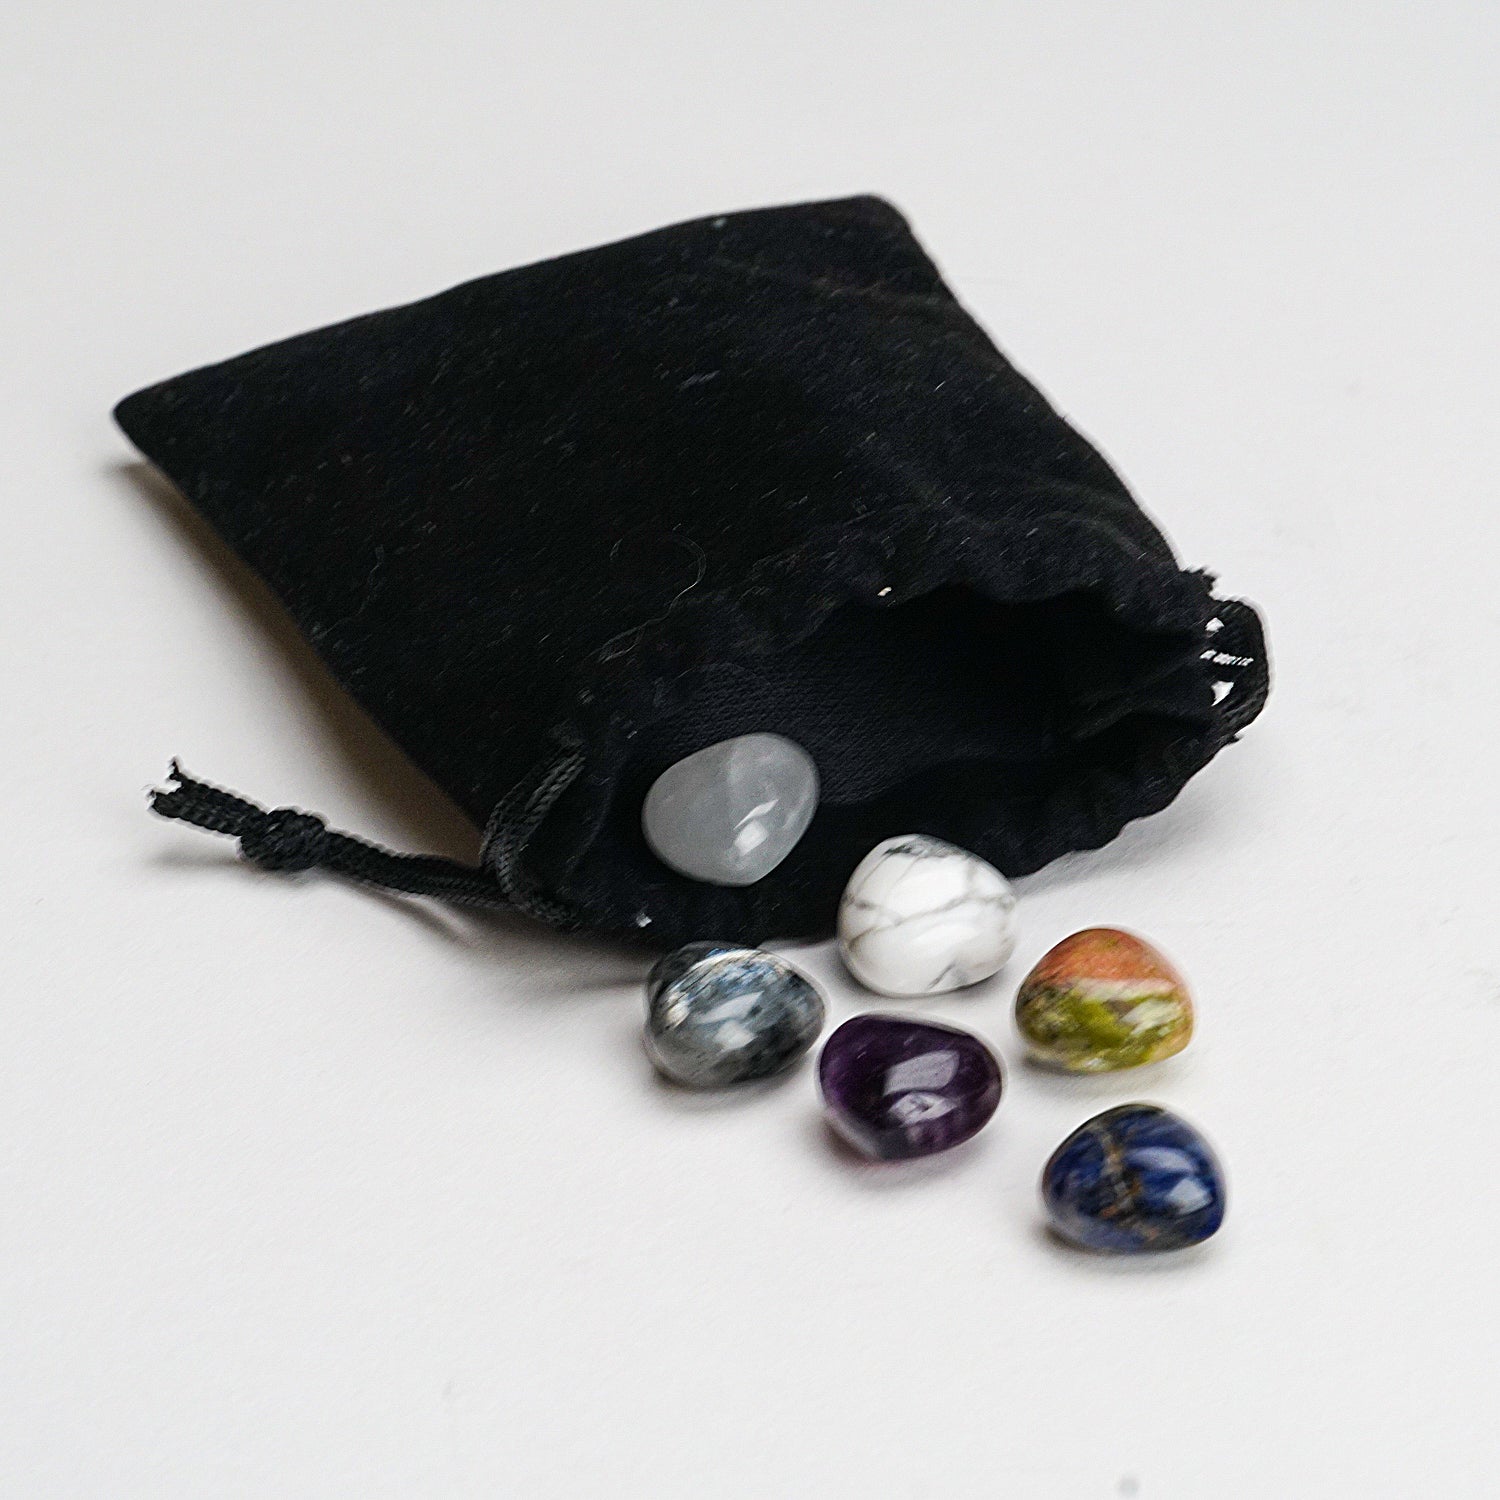 6-Stone Psychic Pouch (Heart)